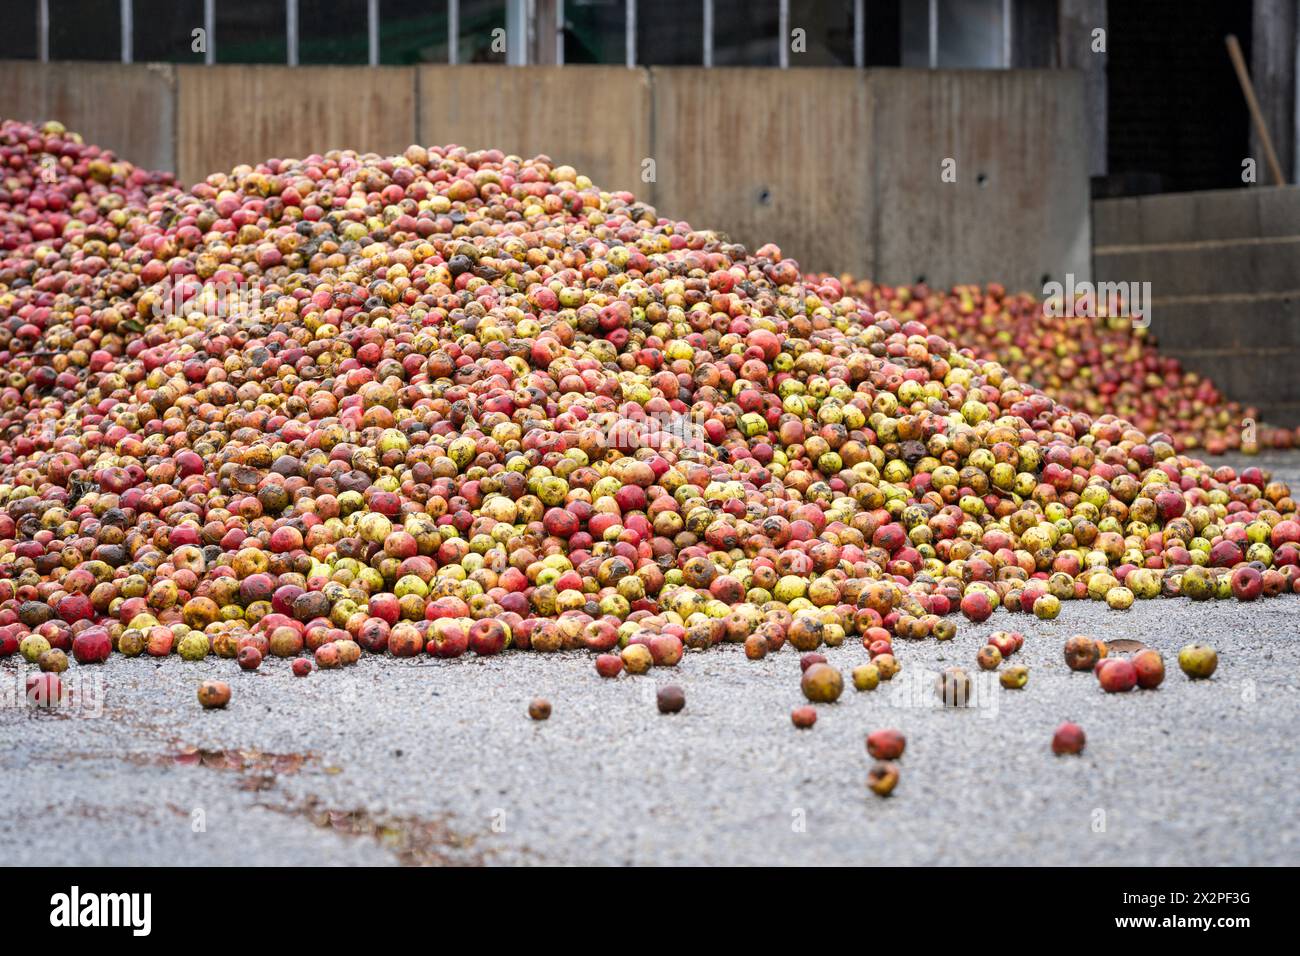 Large pile of apples in cider brewery. Pile of apples harvested for cider production. Stock Photo